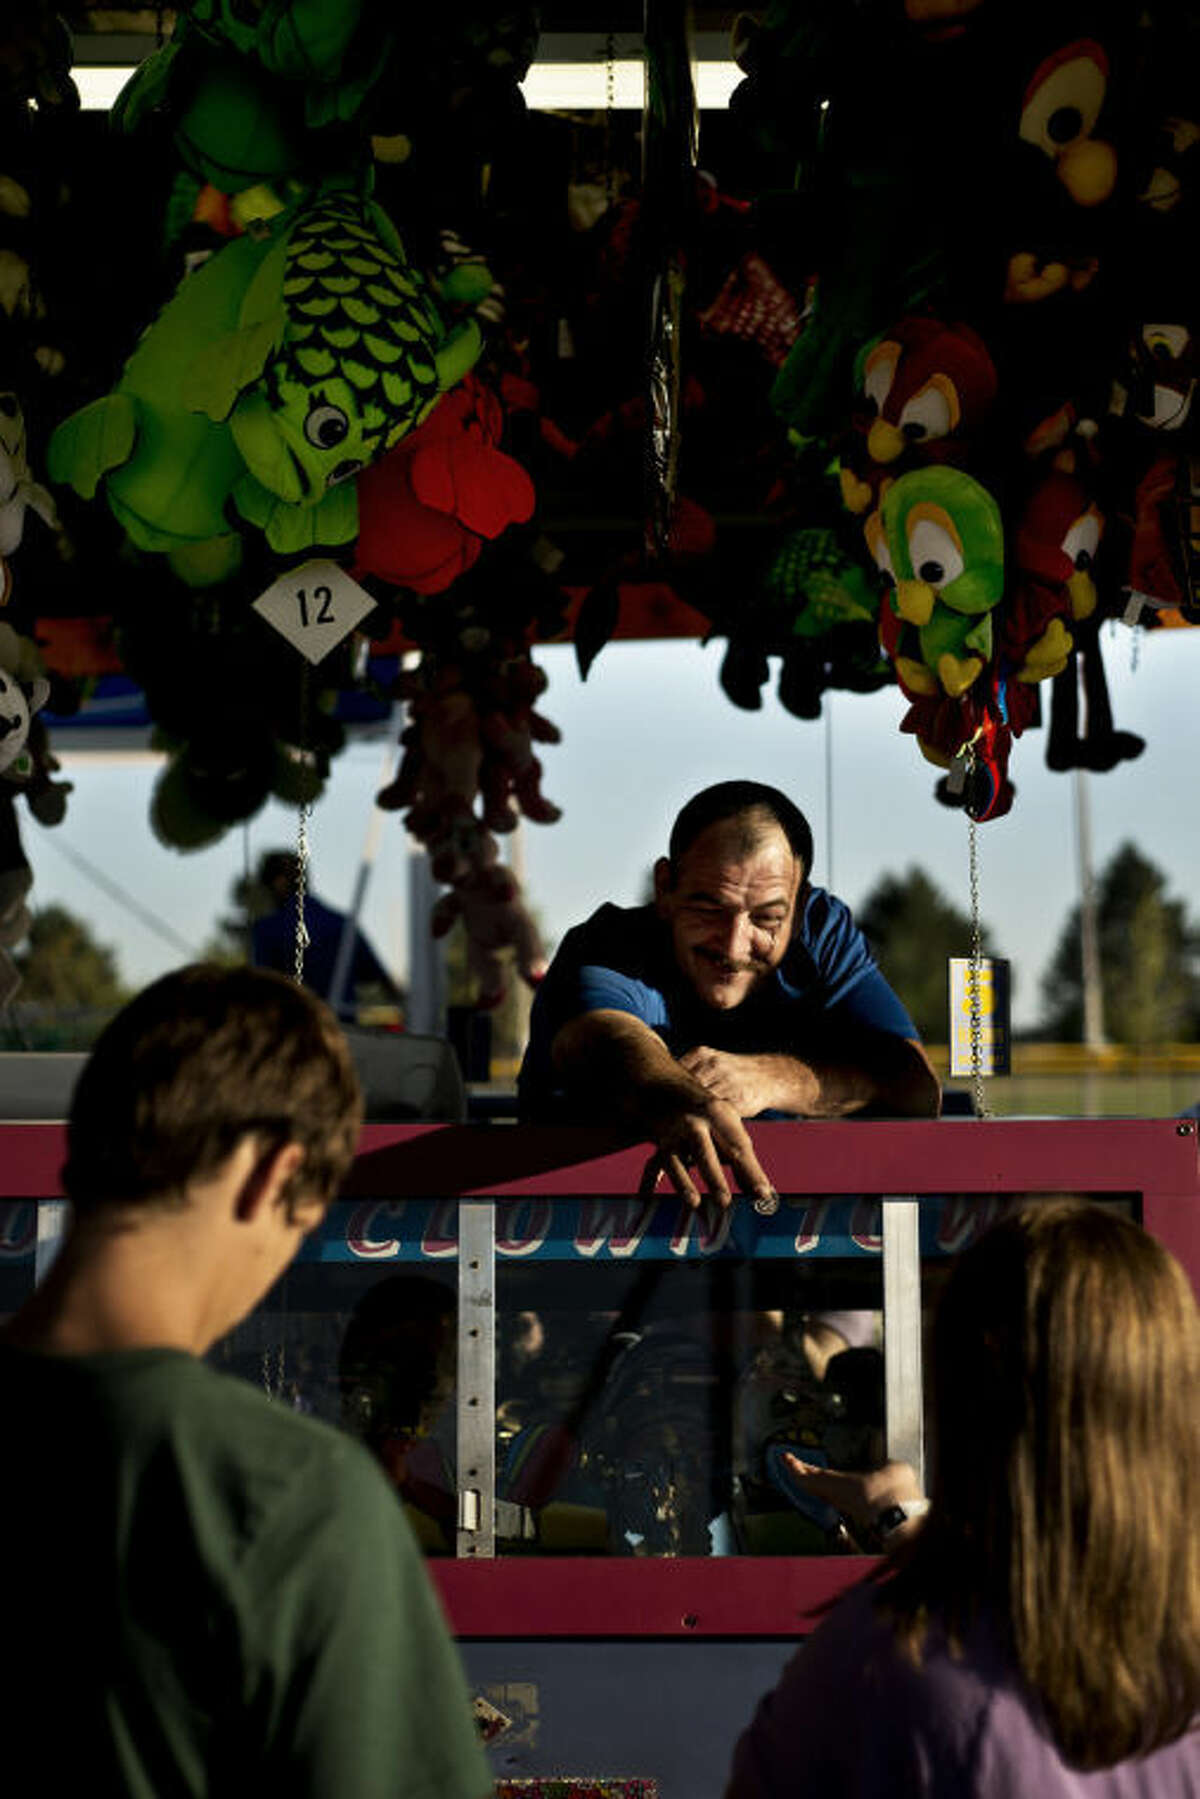 Allen Weaver, of Muskegon, mans the "Doozer" Thursday evening during the Auburn Cornfest. Weaver retired from the navy and has been working at fairs for about a year. "Everyone is happy, and that's a good thing," he said about fairs. Cornfest continues throughout the weekend with carnival games, food and live entertainment.